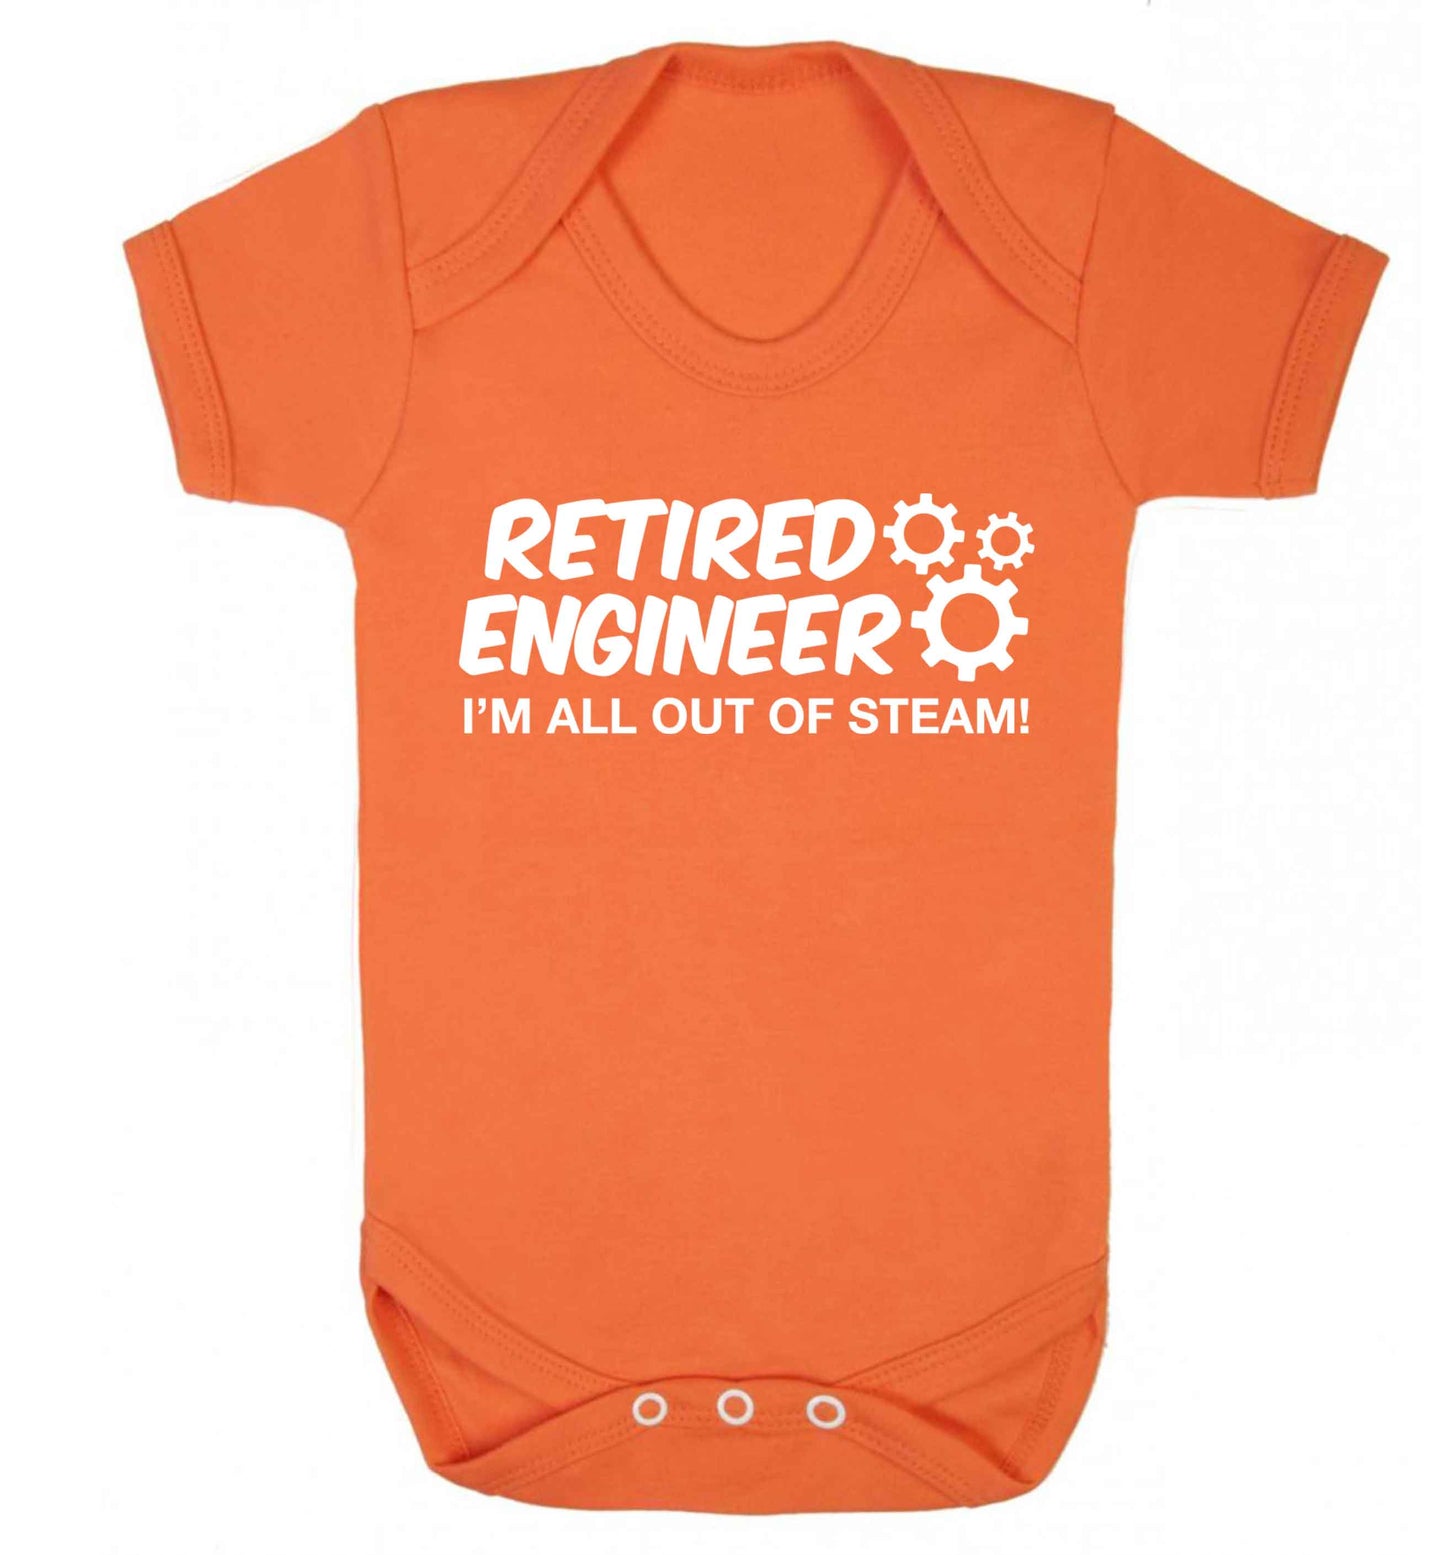 Retired engineer I'm all out of steam Baby Vest orange 18-24 months